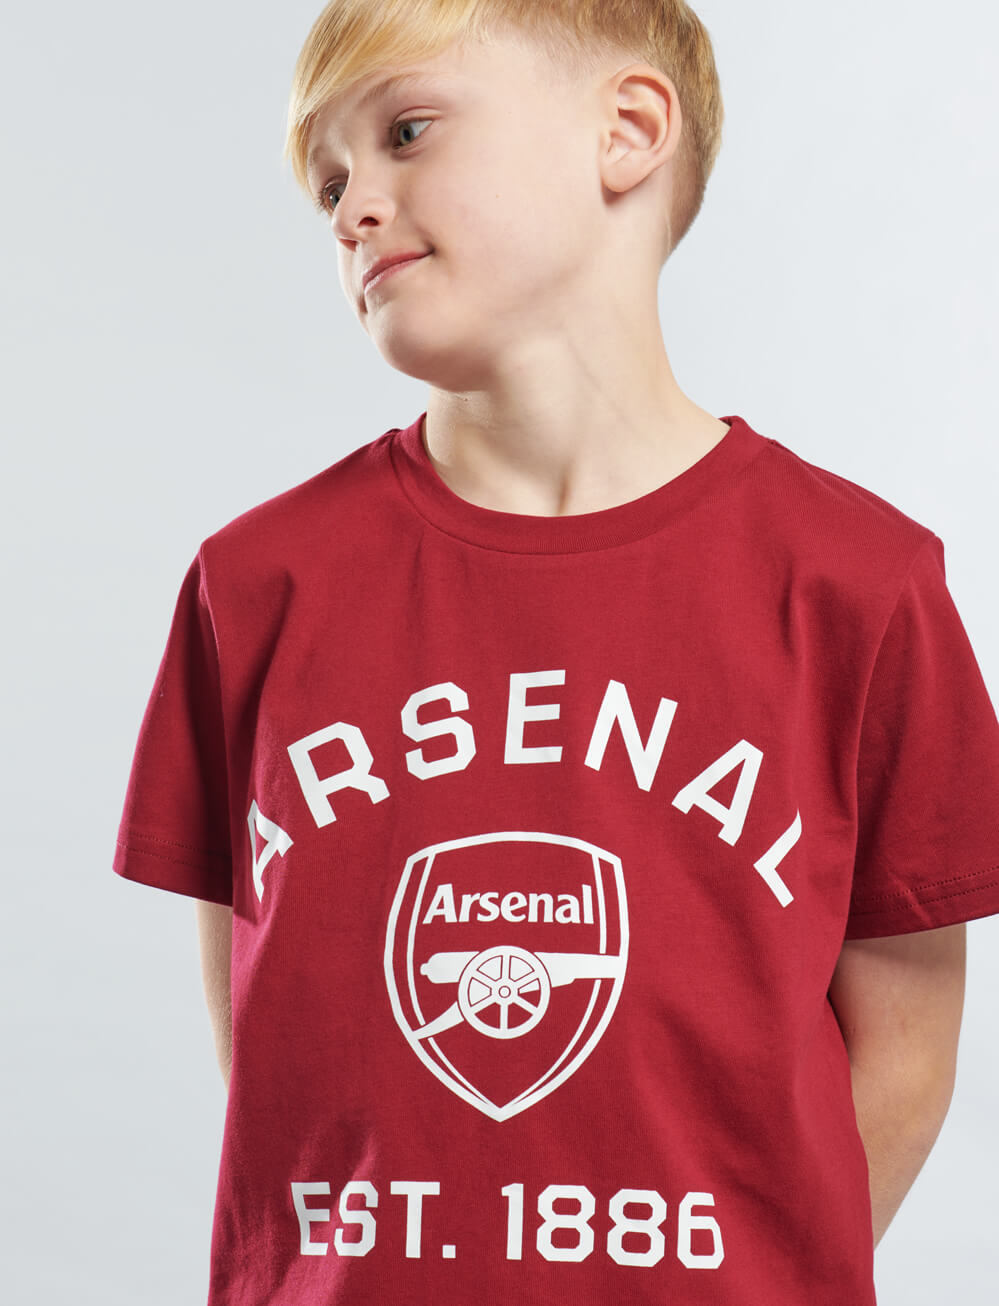 Official Arsenal Kids Graphic T-Shirt - Red - The World Football Store